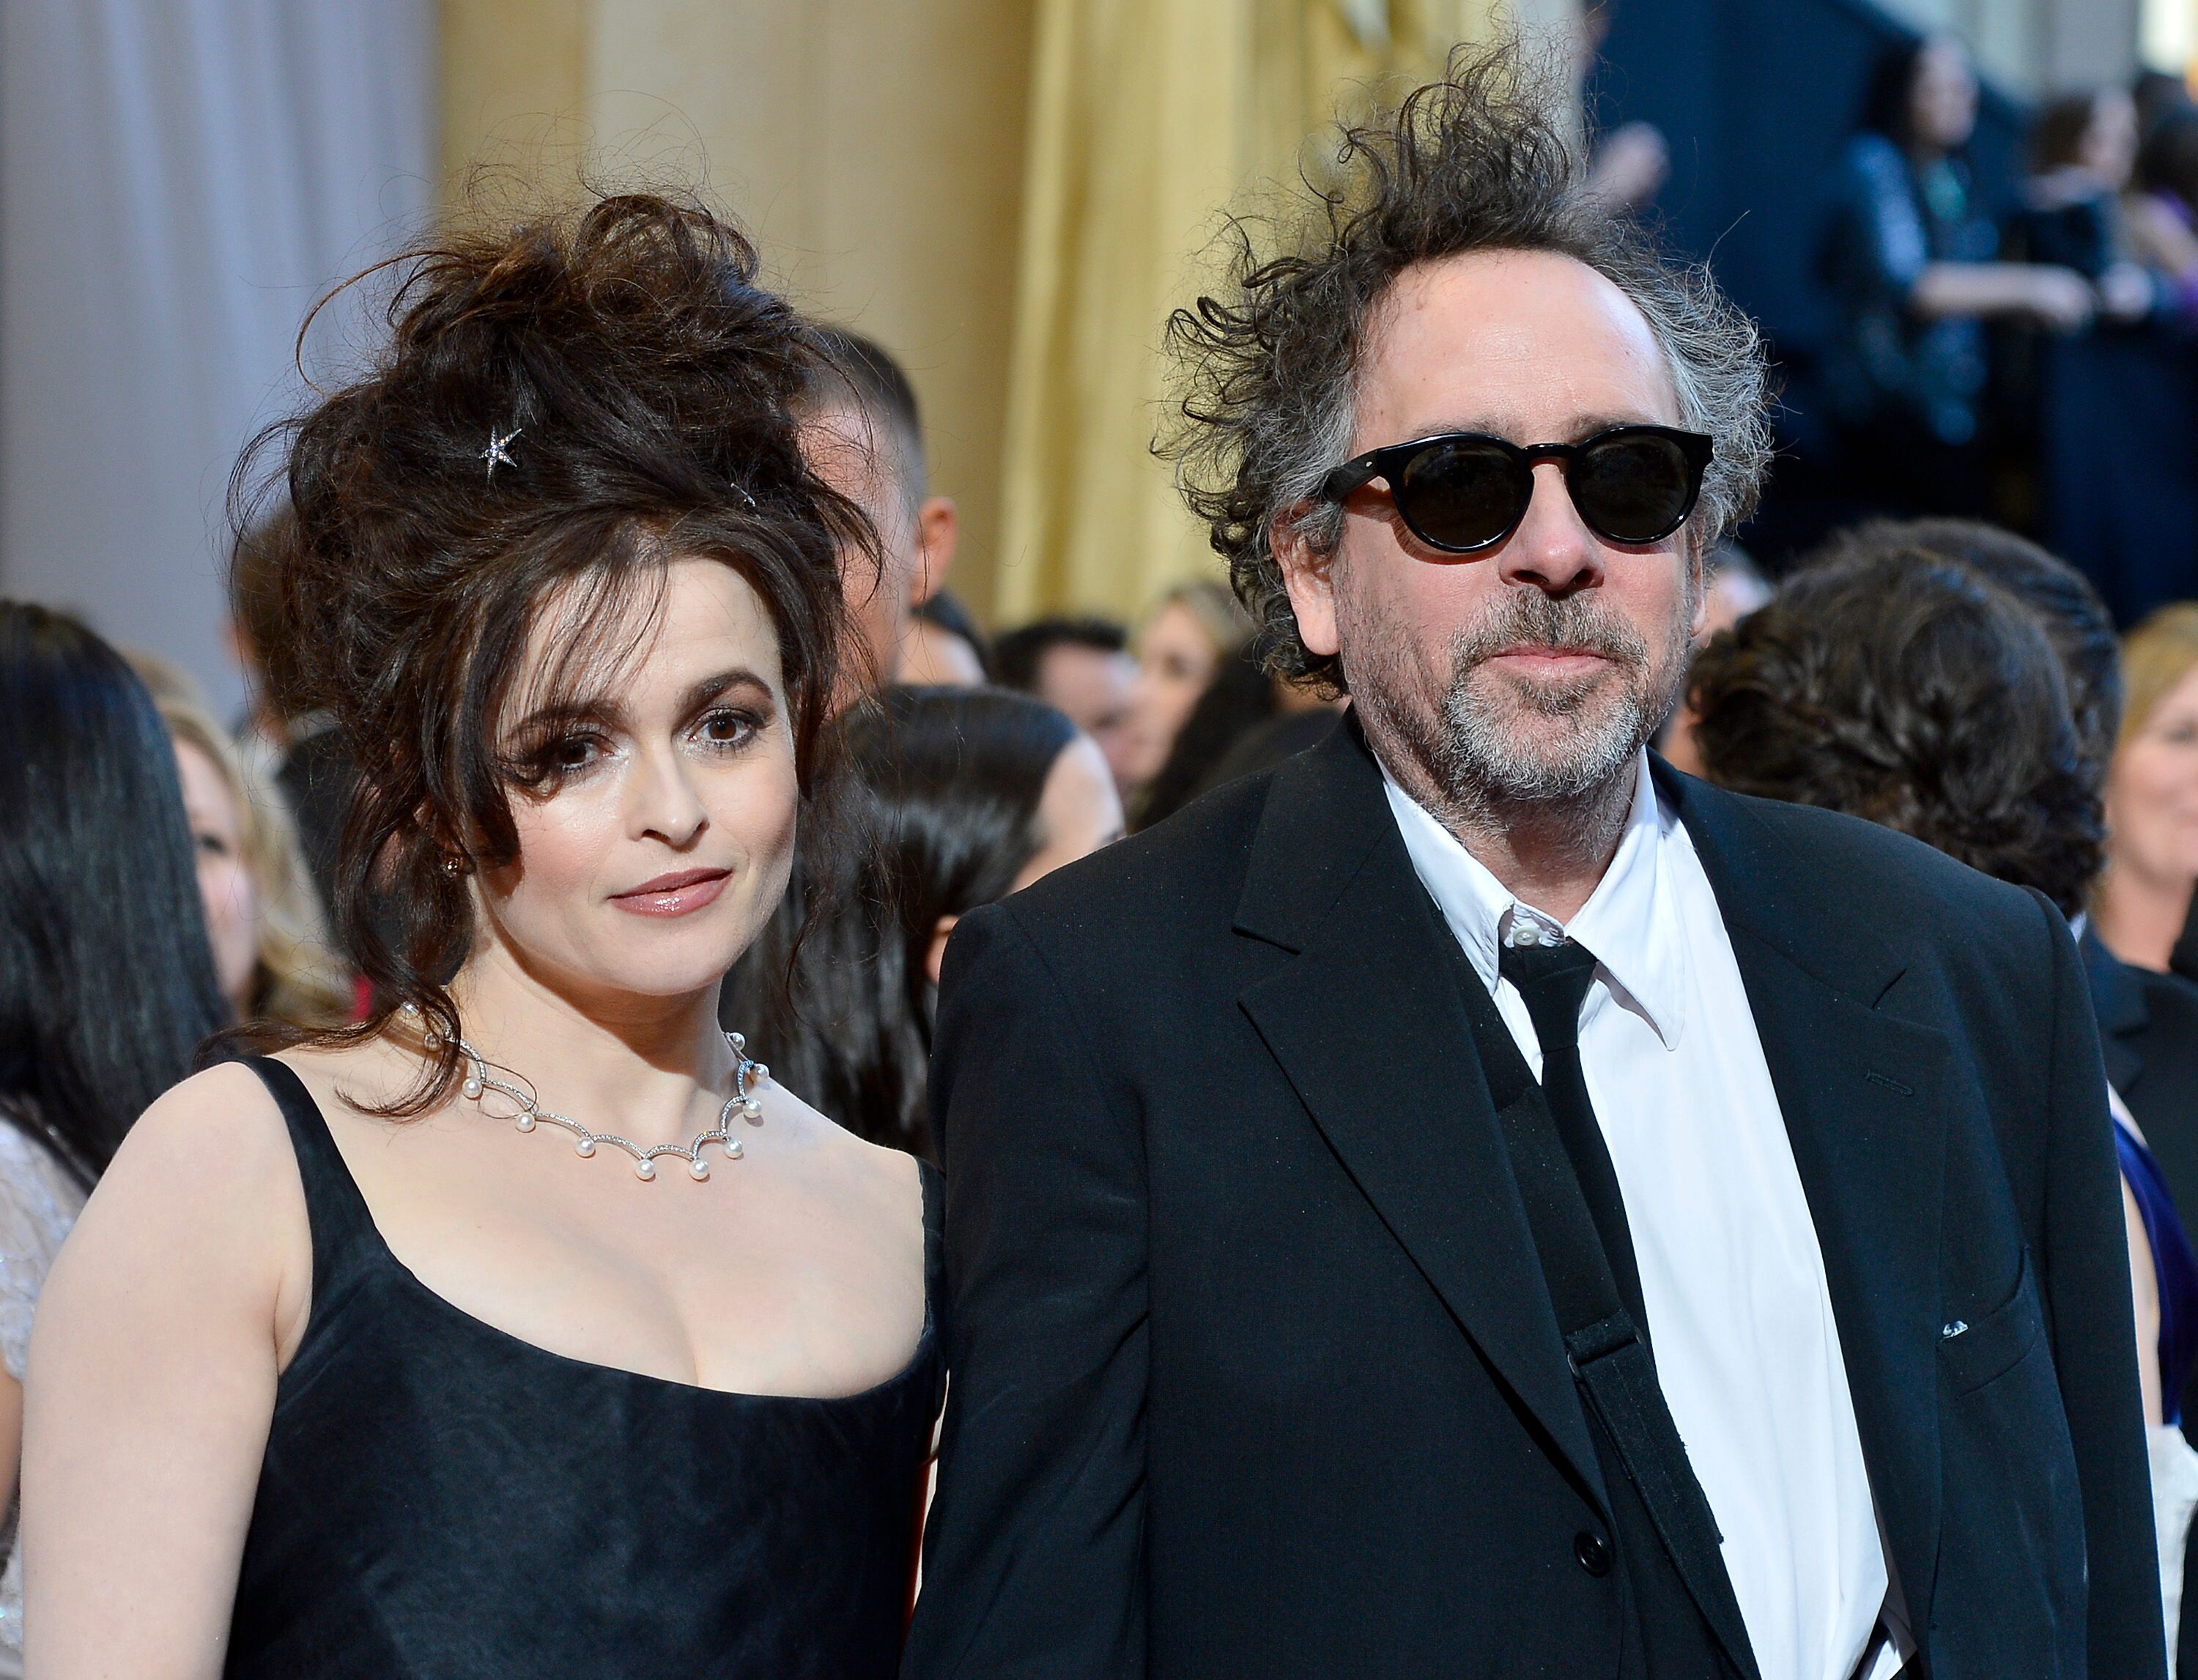 Actress Helena Bonham Carter and director Tim Burton at the Oscars on February 24, 2013. | Source: Getty Images